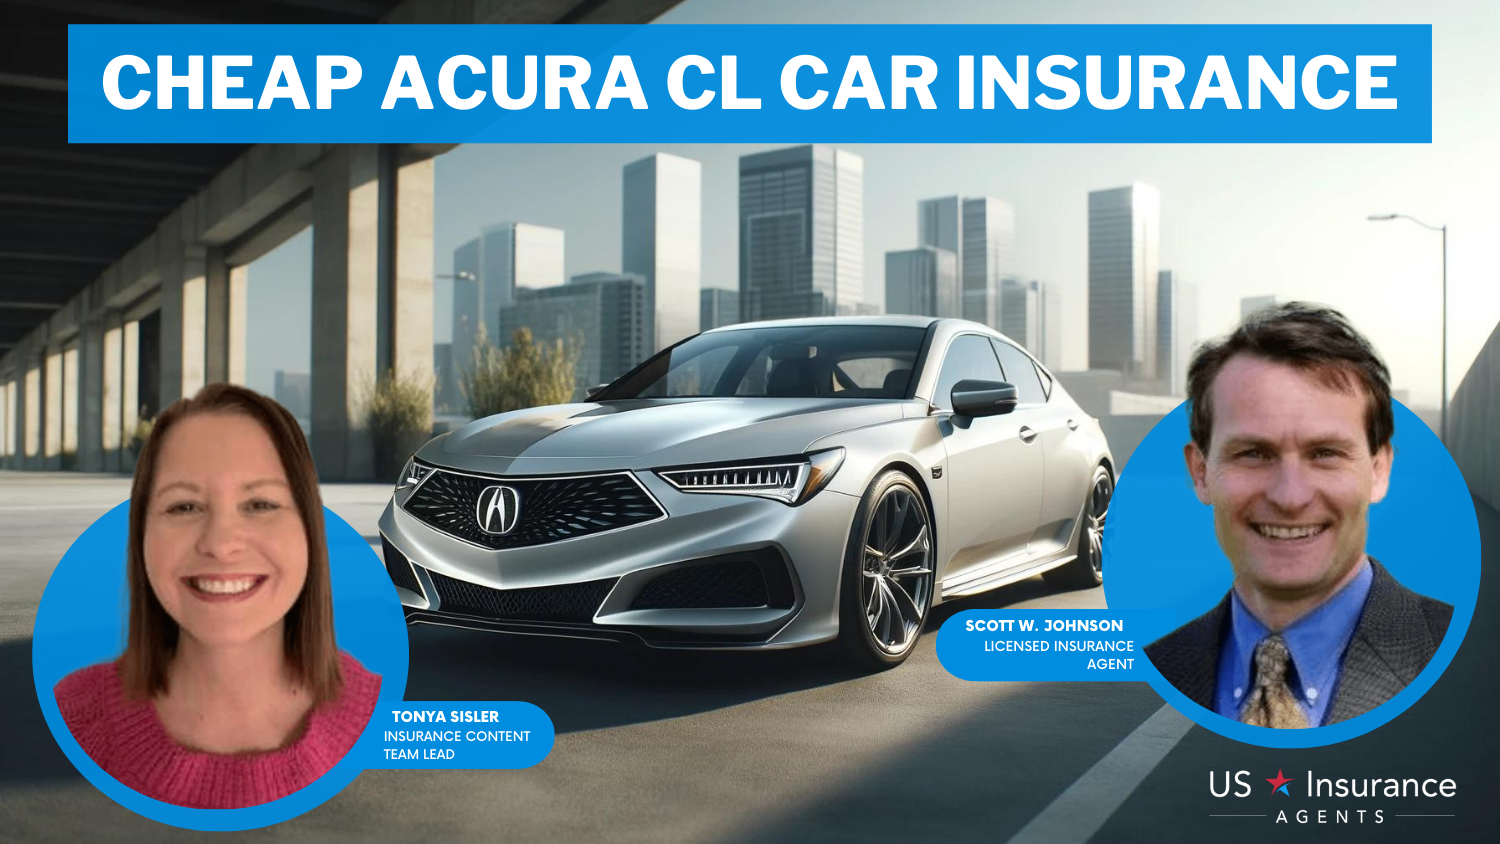 3 Cheap Acura CL Car Insurance: The General, Erie, Nationwide